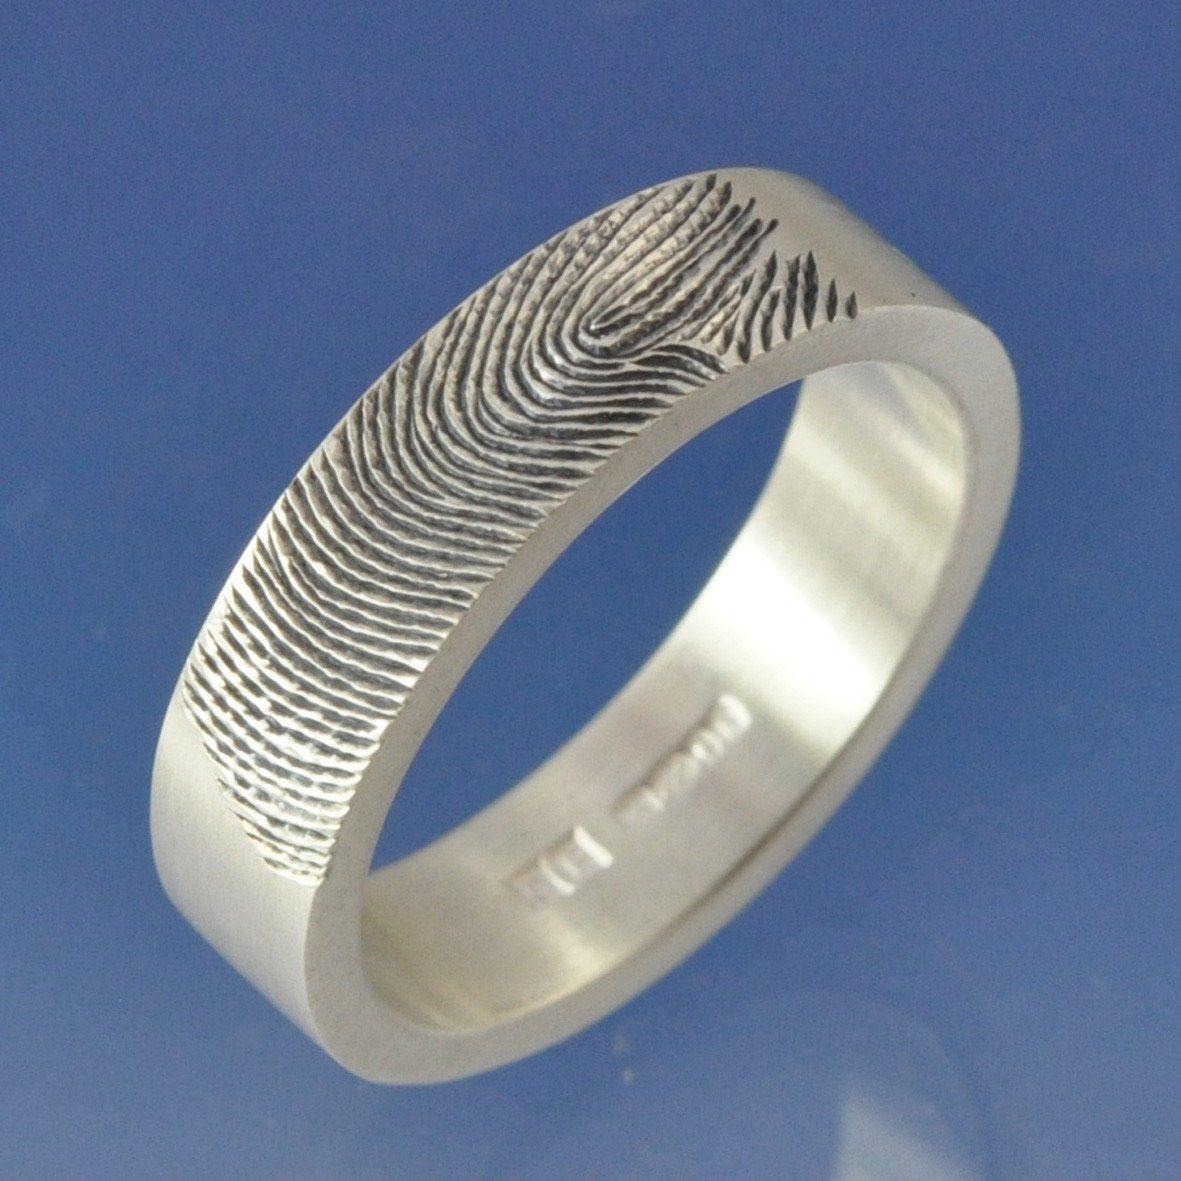 Fingerprint Ring - Sterling Silver Ring by Chris Parry Jewellery